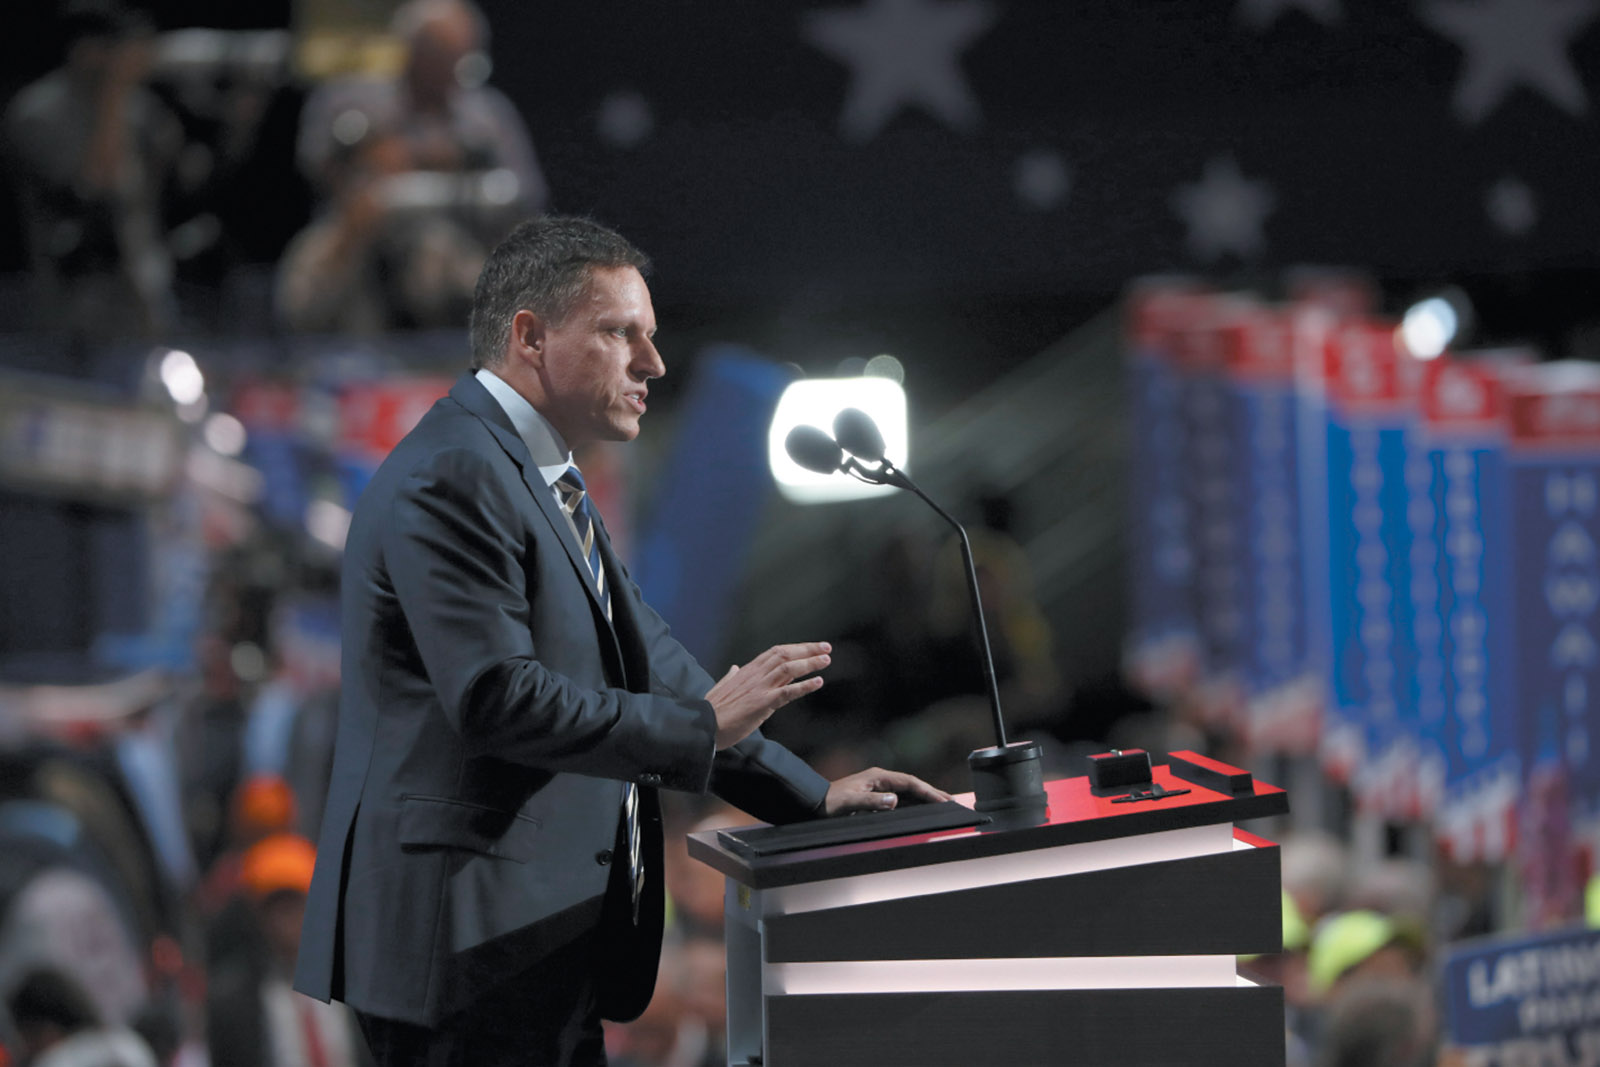 Peter Thiel speaking at the Republican National Convention, Cleveland, July 2016. Thiel, the first outside investor in Facebook and a cofounder of PayPal, is a founder of Palantir, a Silicon Valley firm funded by the CIA, whose algorithms allow for rapid analysis of voluminous data that it makes available to intelligence agencies and numerous police forces as well as to corporations and financial institutions.